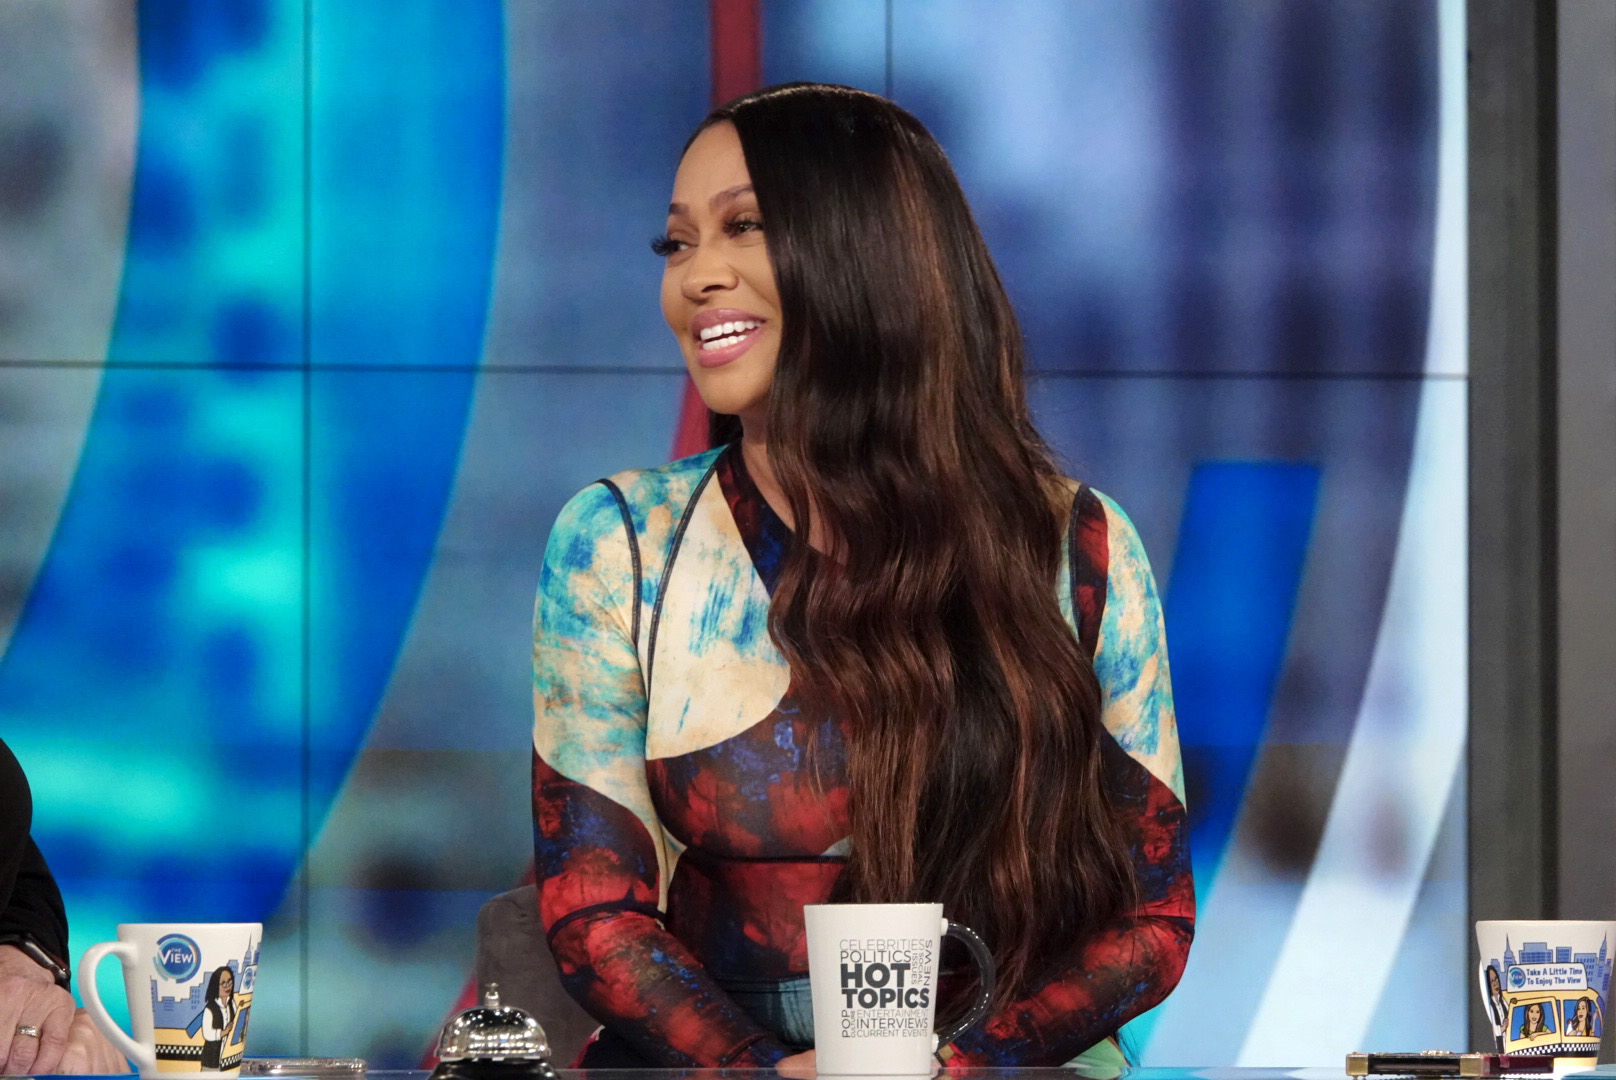 PHOTO: La La Anthony dishes about the final season of her show "Power" during her appearance on "The View," Oct. 10, 2019.